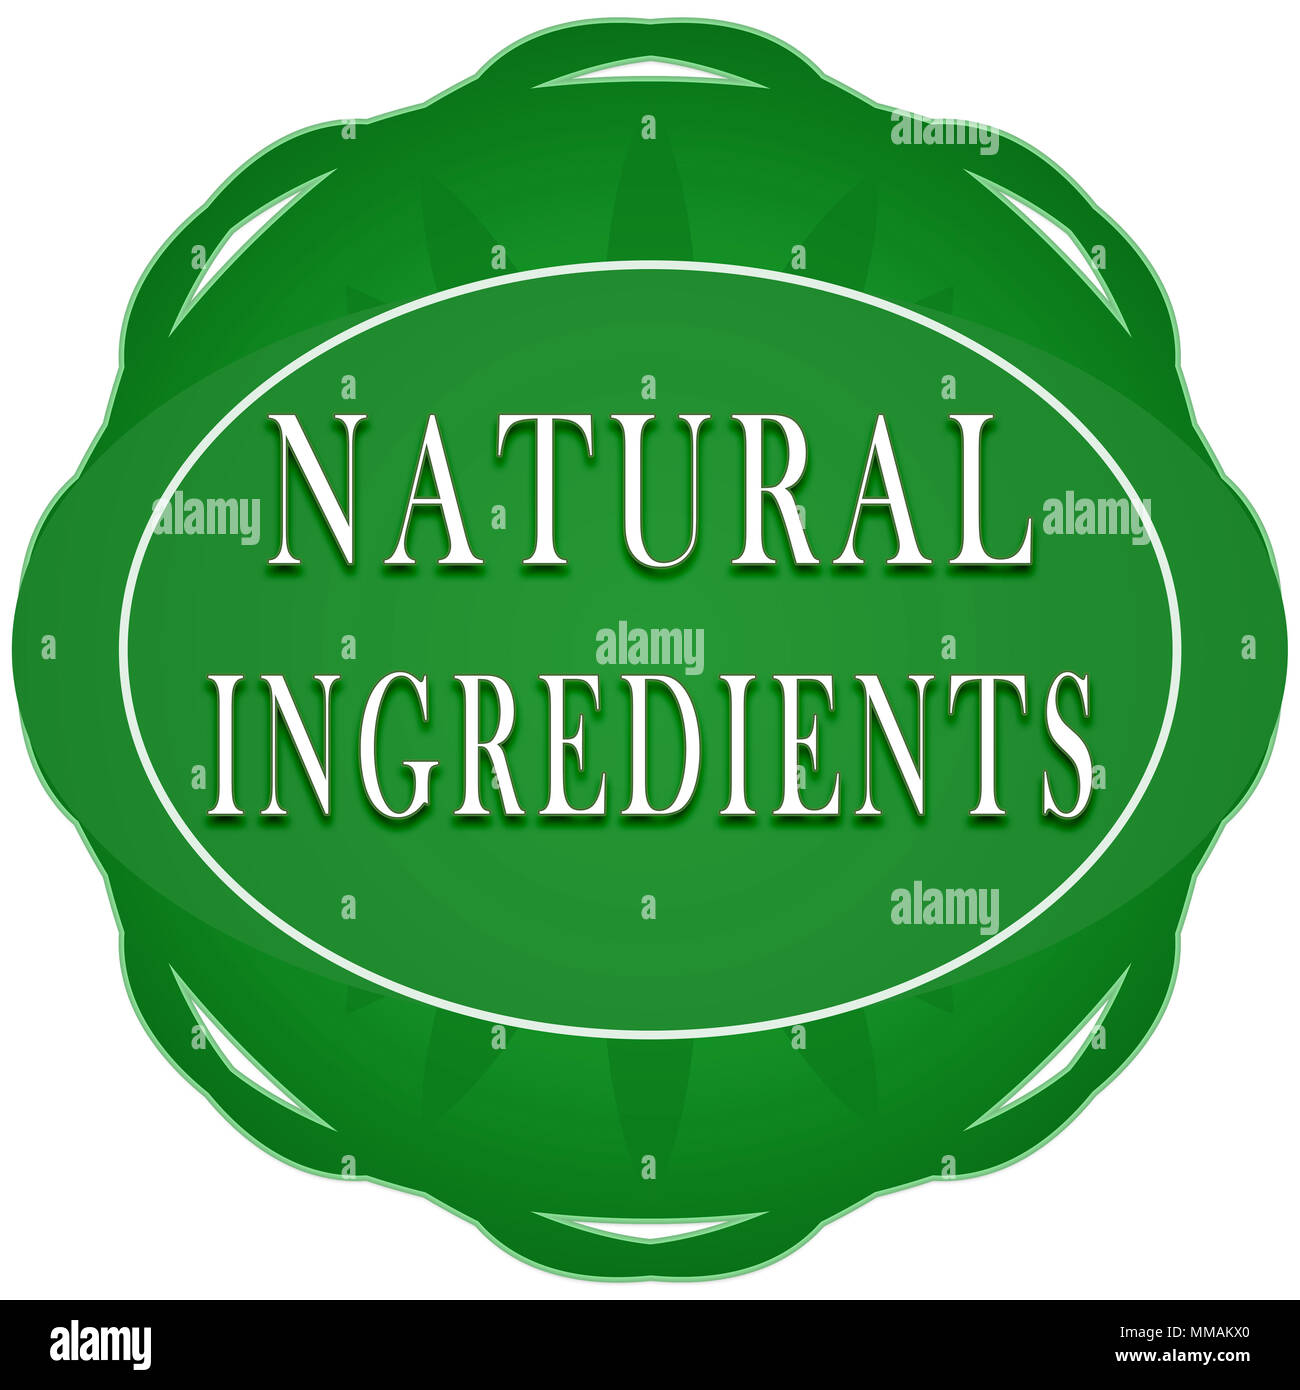 Natural ingredients badge, icon, logo. Isolated Stock Photo